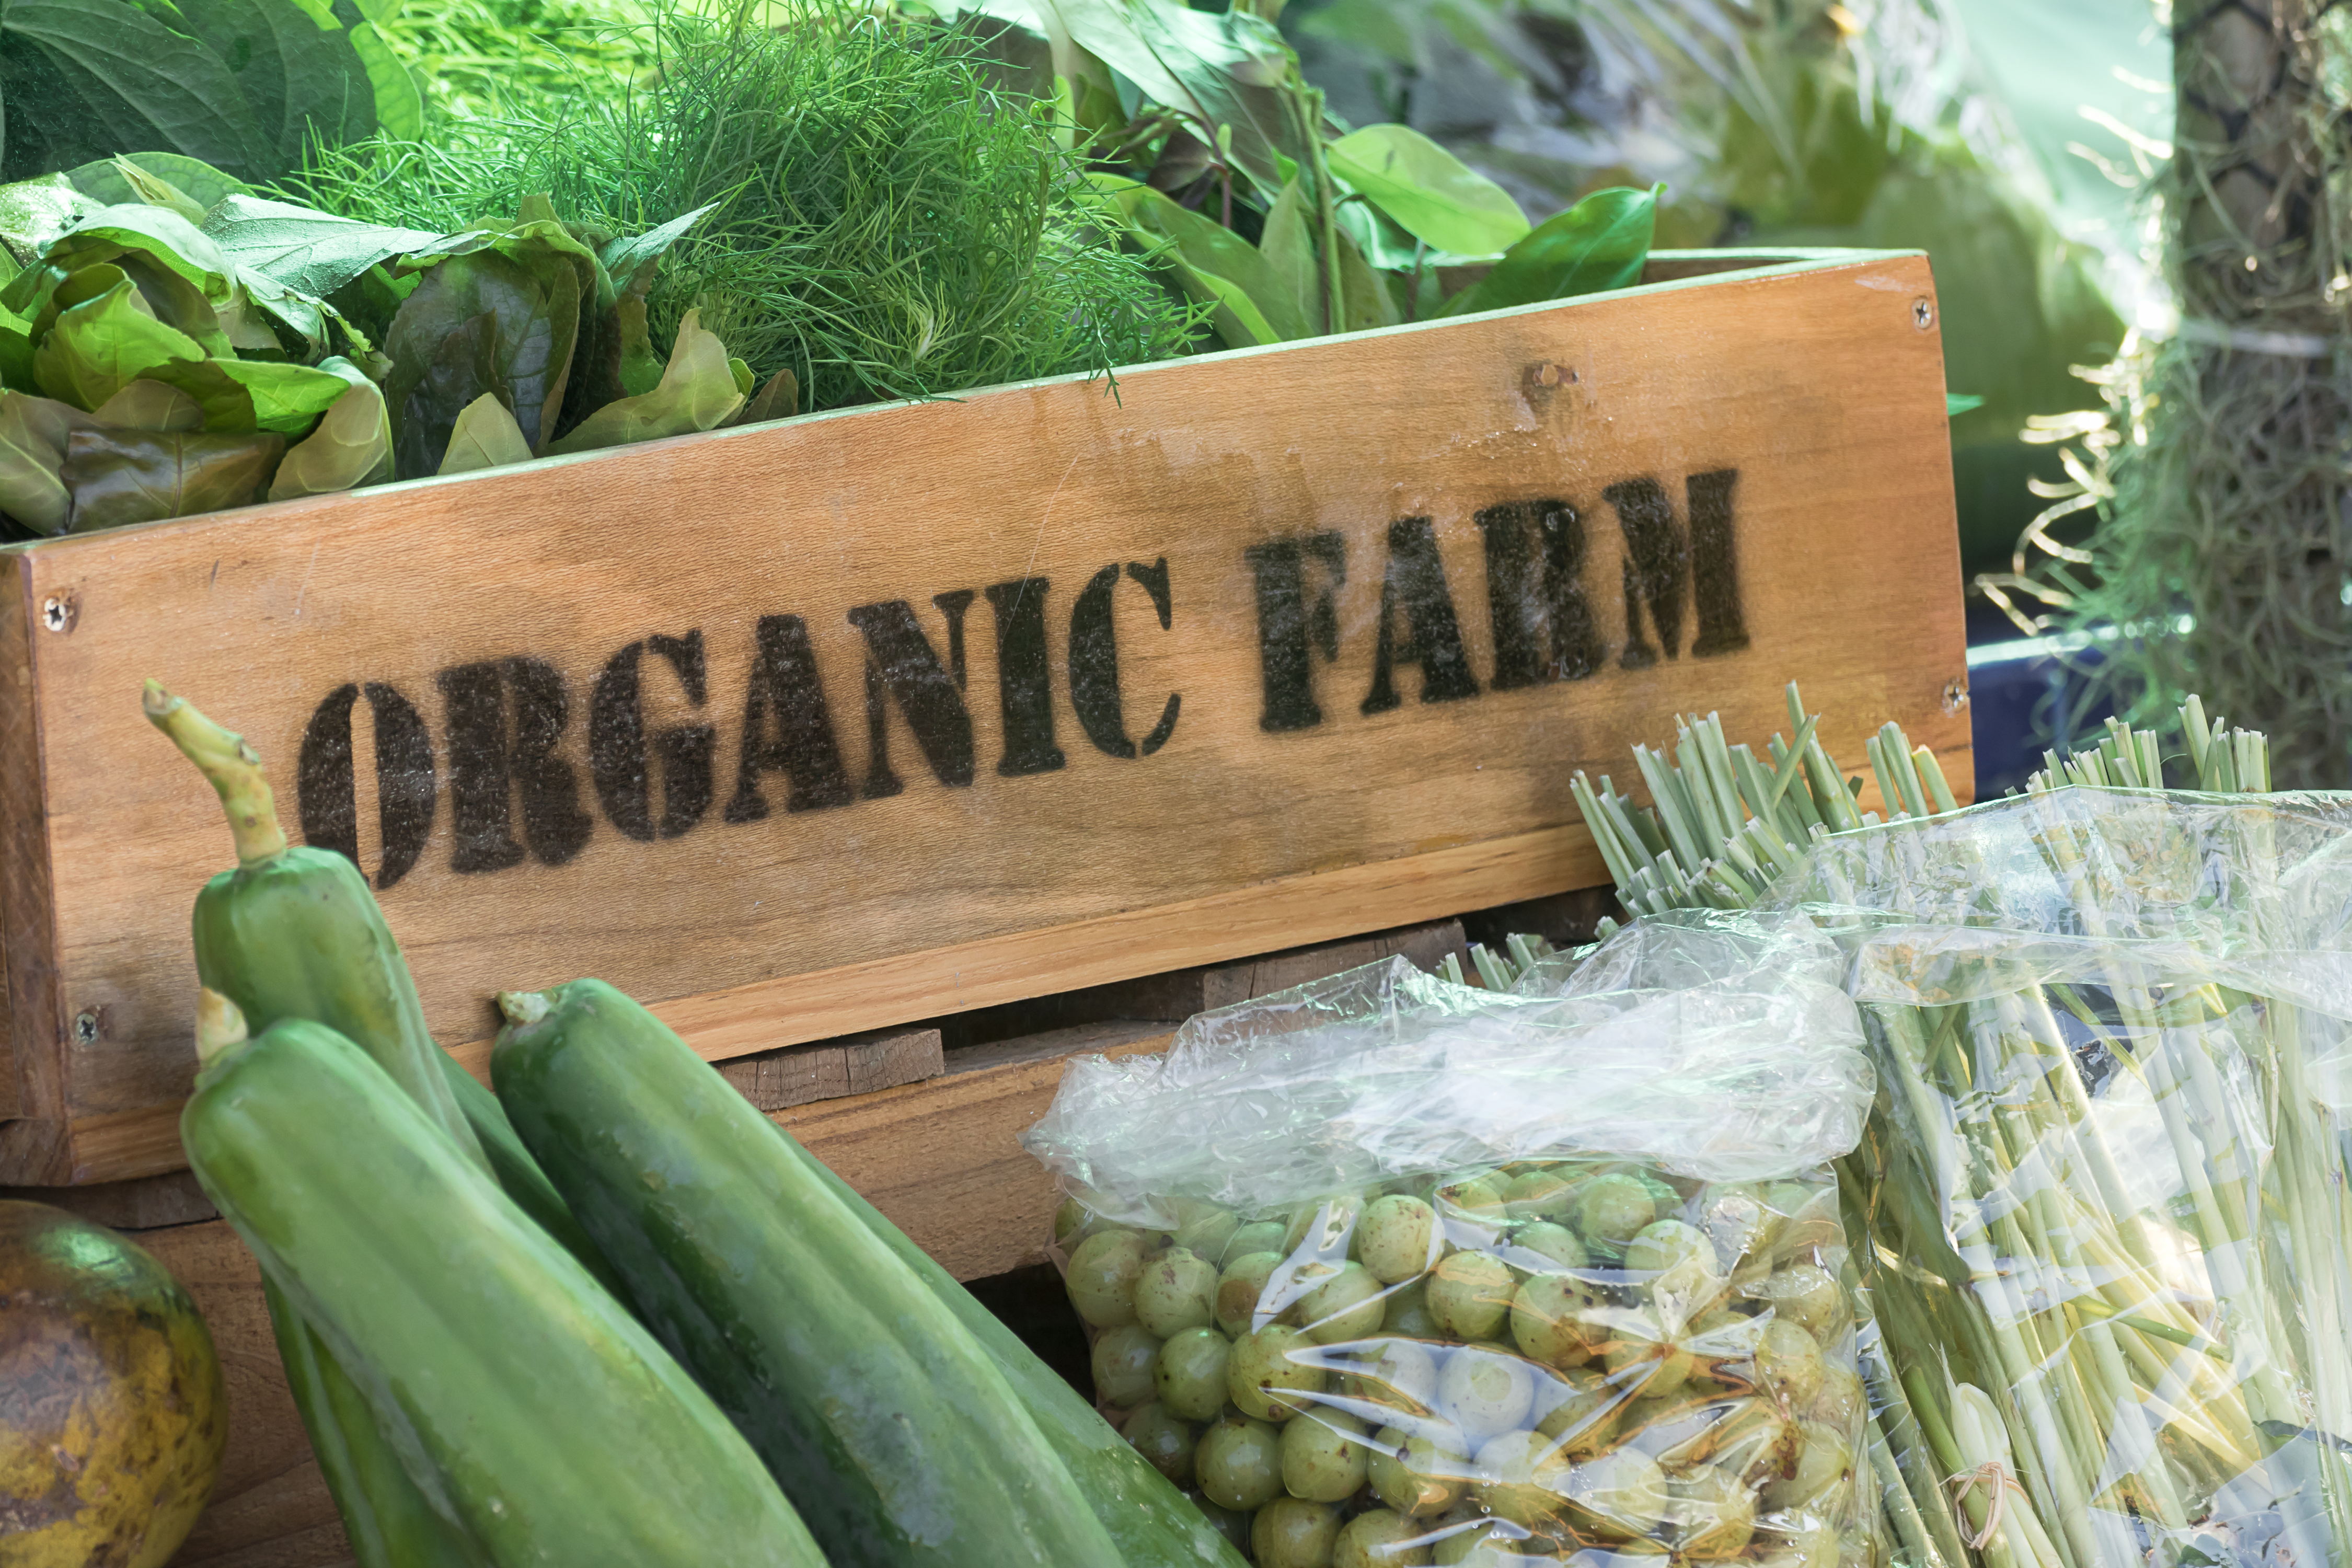 Creating Legislation To Support Wisconsin's Organic Agriculture